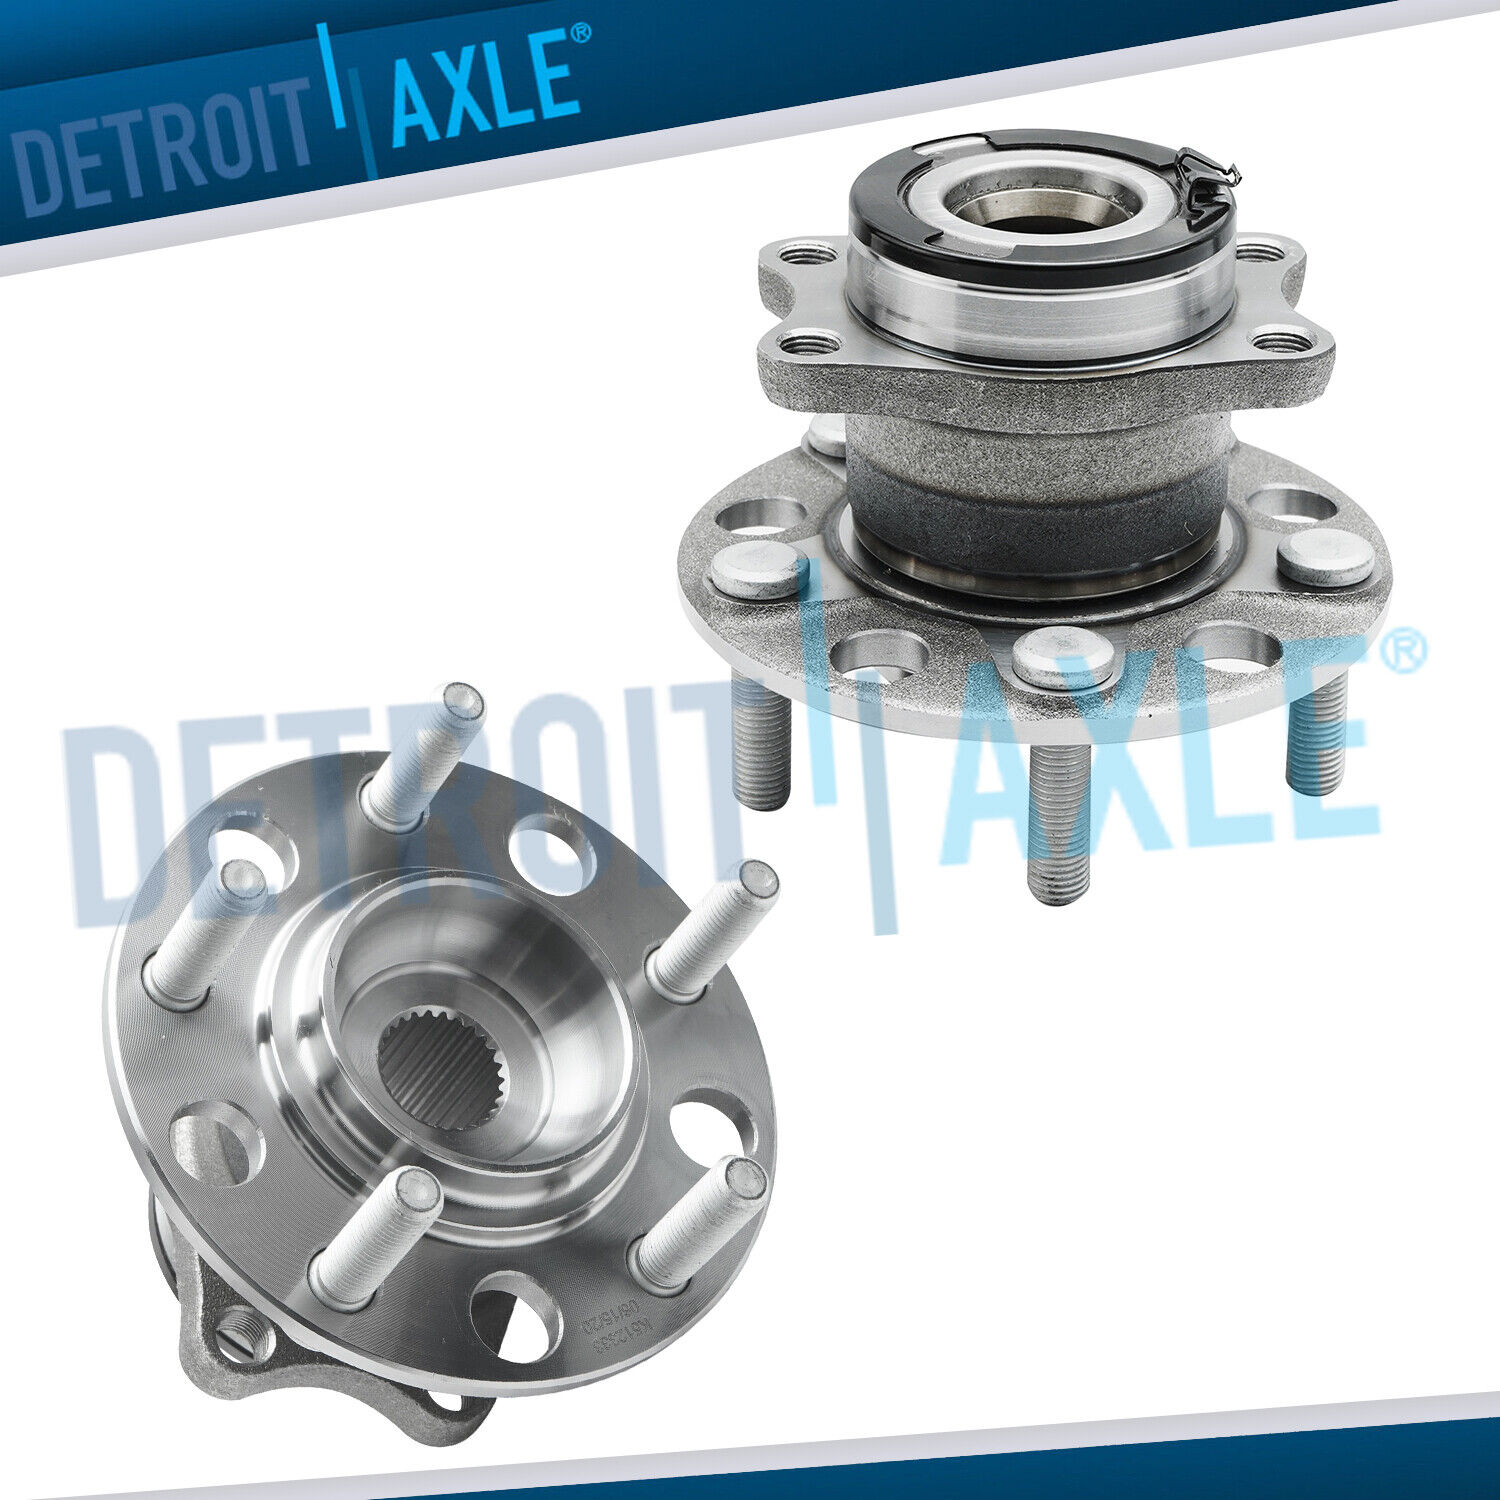 AWD Rear Wheel Bearing and Hubs for 2007 2008 Dodge Caliber Jeep Compass Patriot